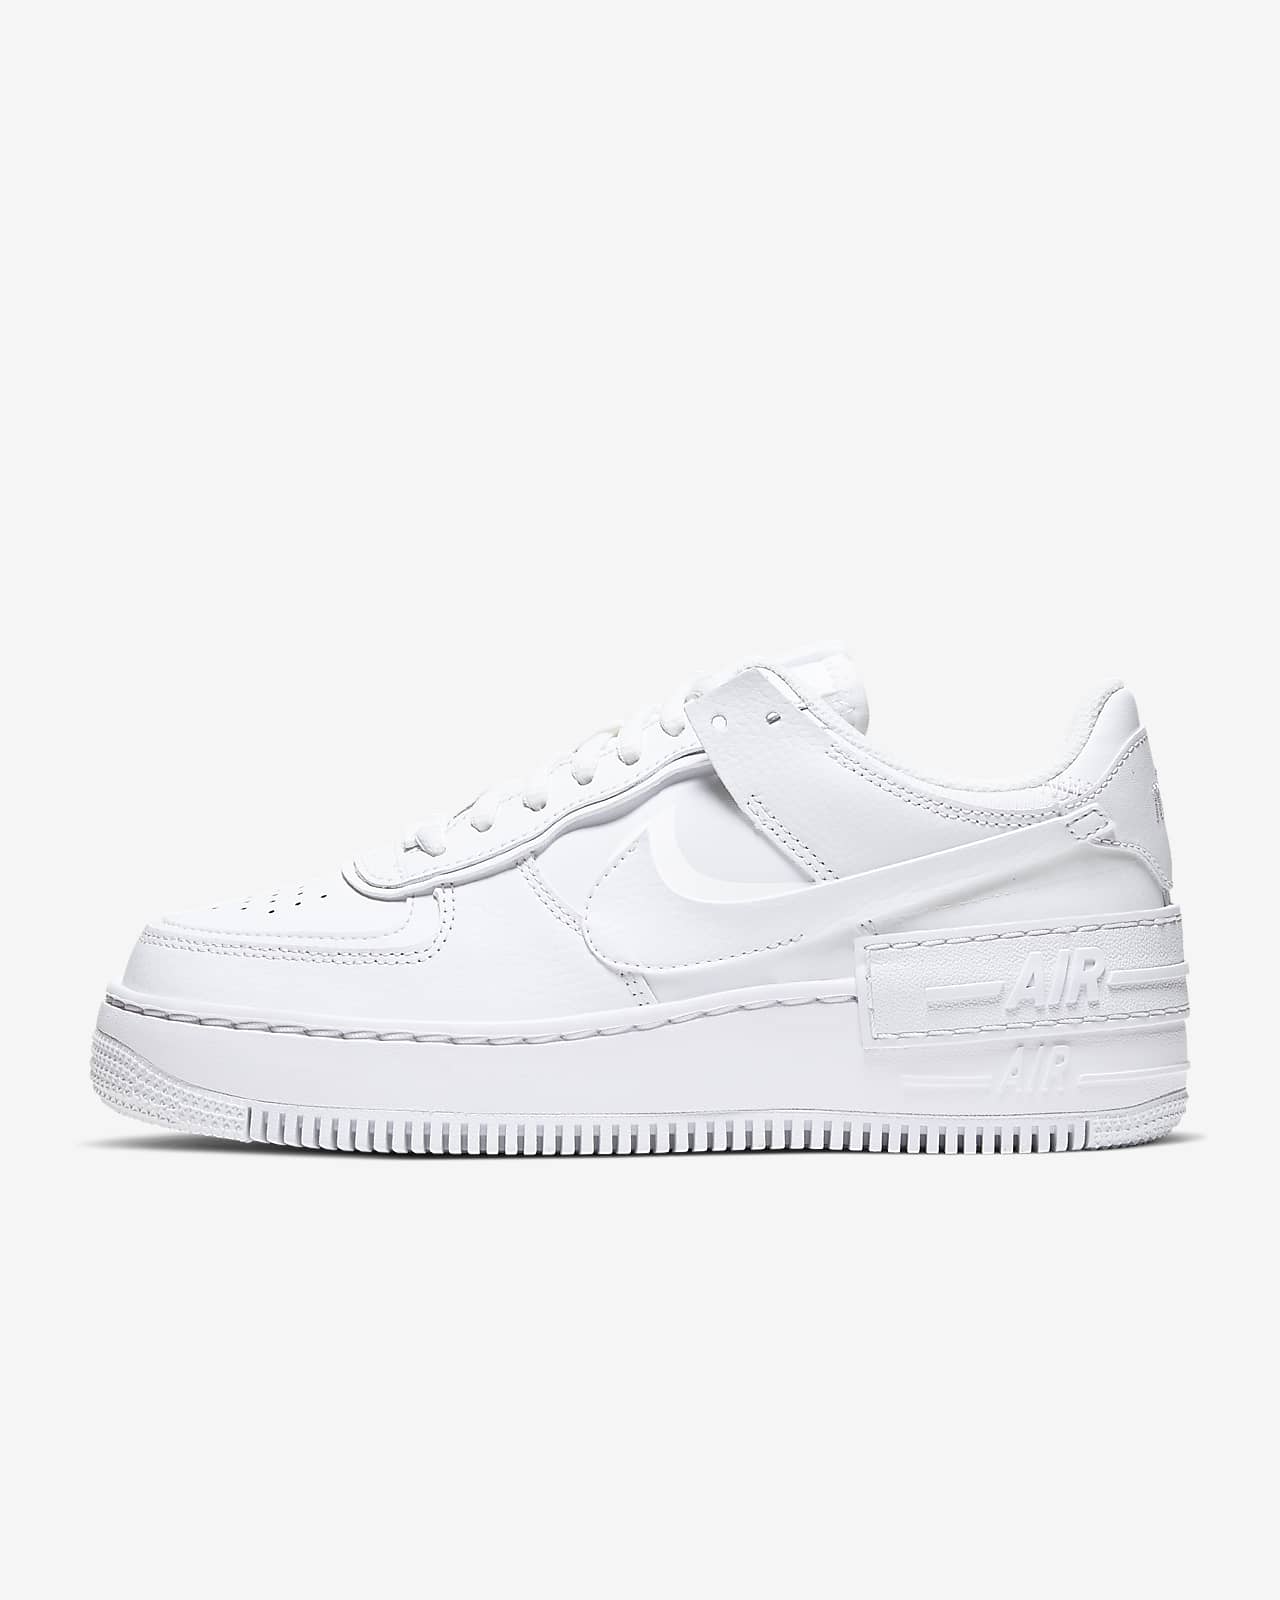 white nike air force 1 size 5.5